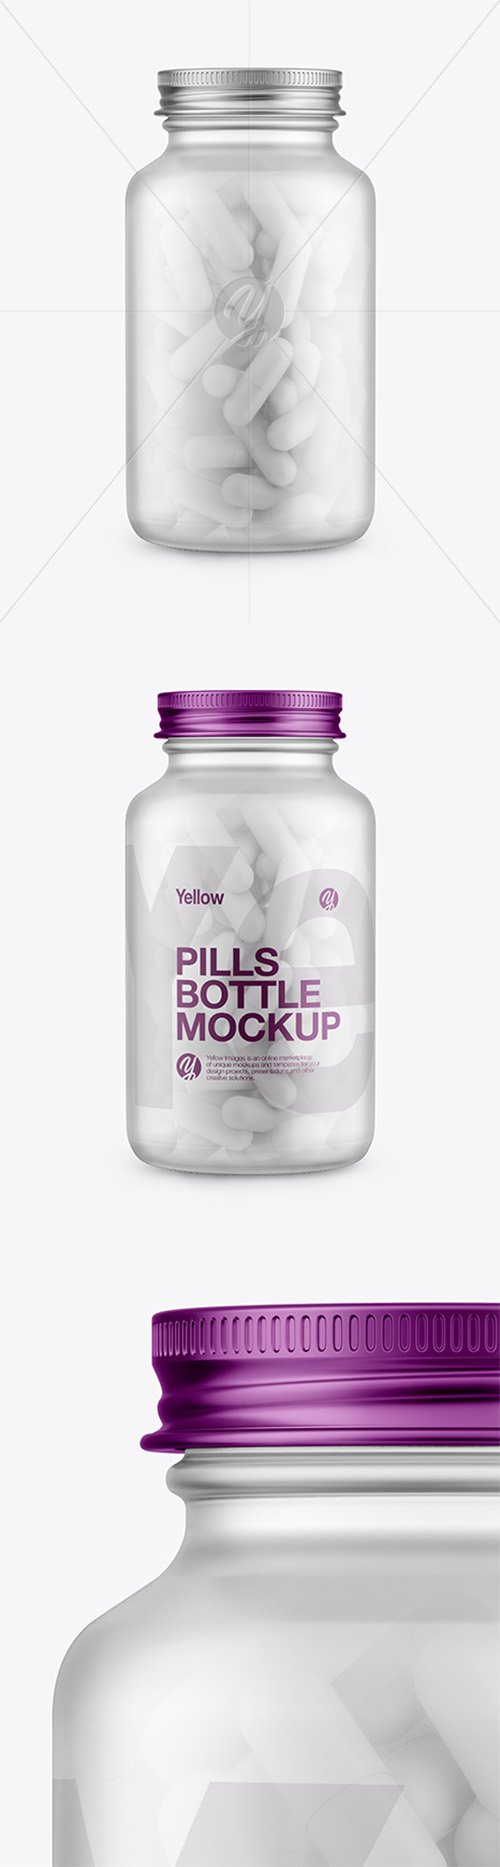 Frosted Glass Bottle With Pills Mockup 39077 TIF